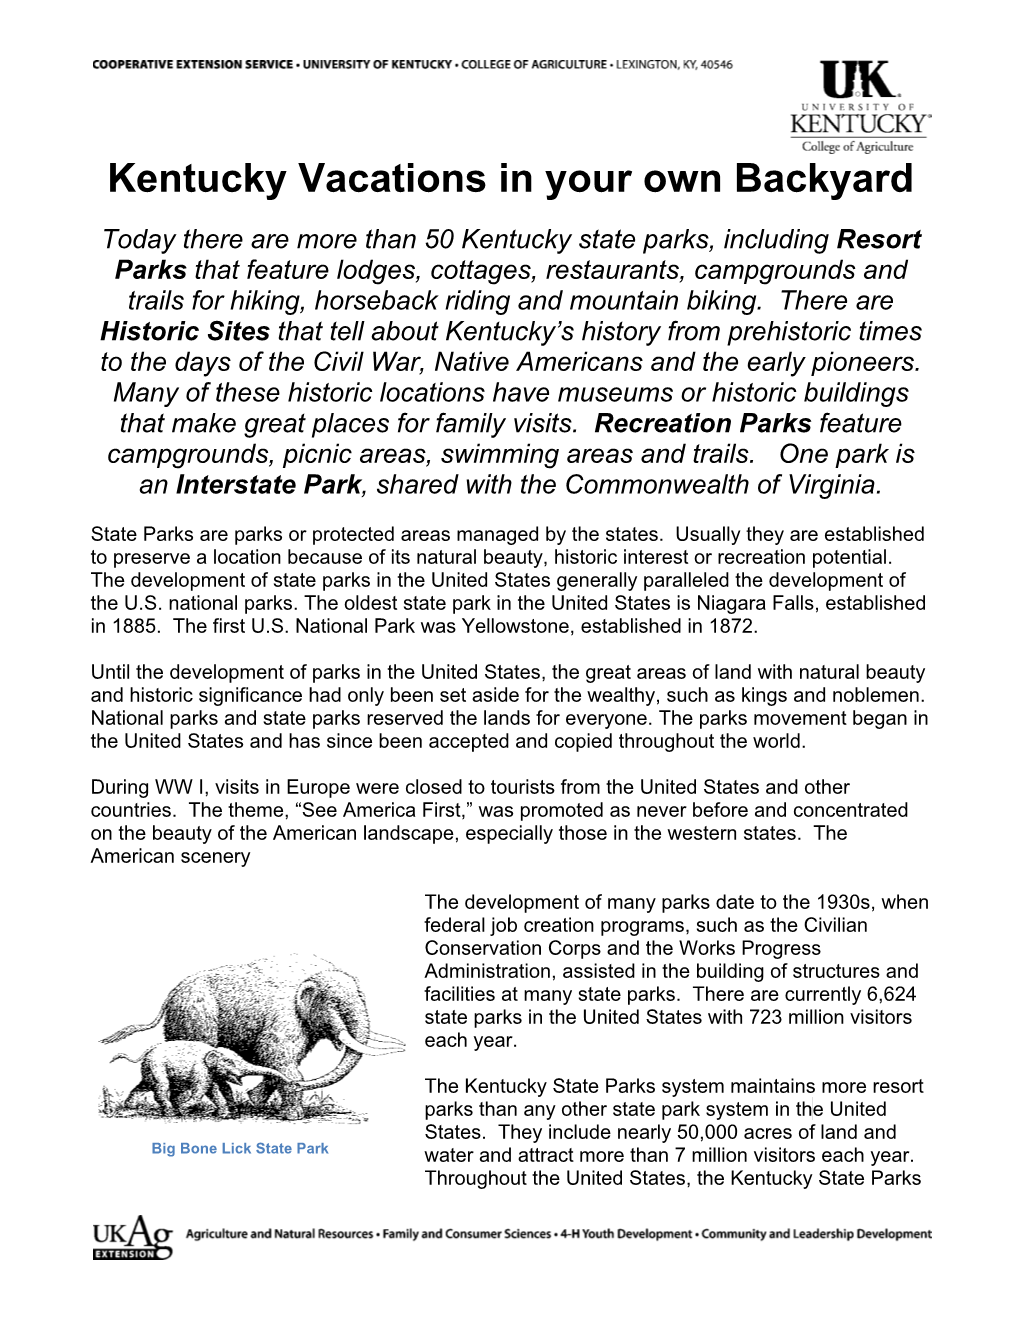 Kentucky Vacations in Your Own Backyard